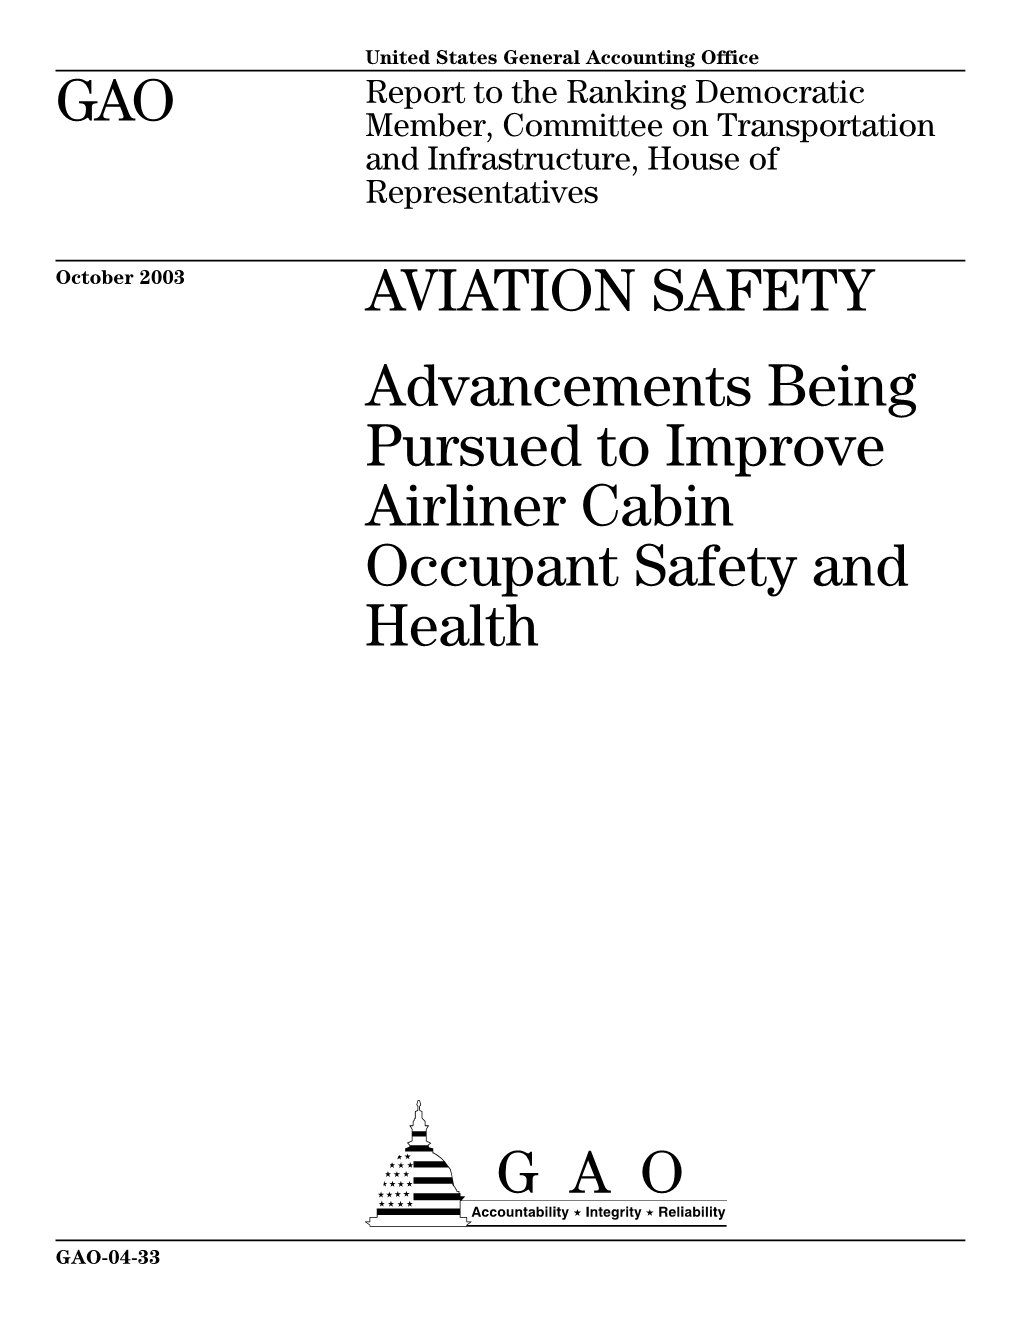 GAO-04-33 Aviation Safety: Advancements Being Pursued To